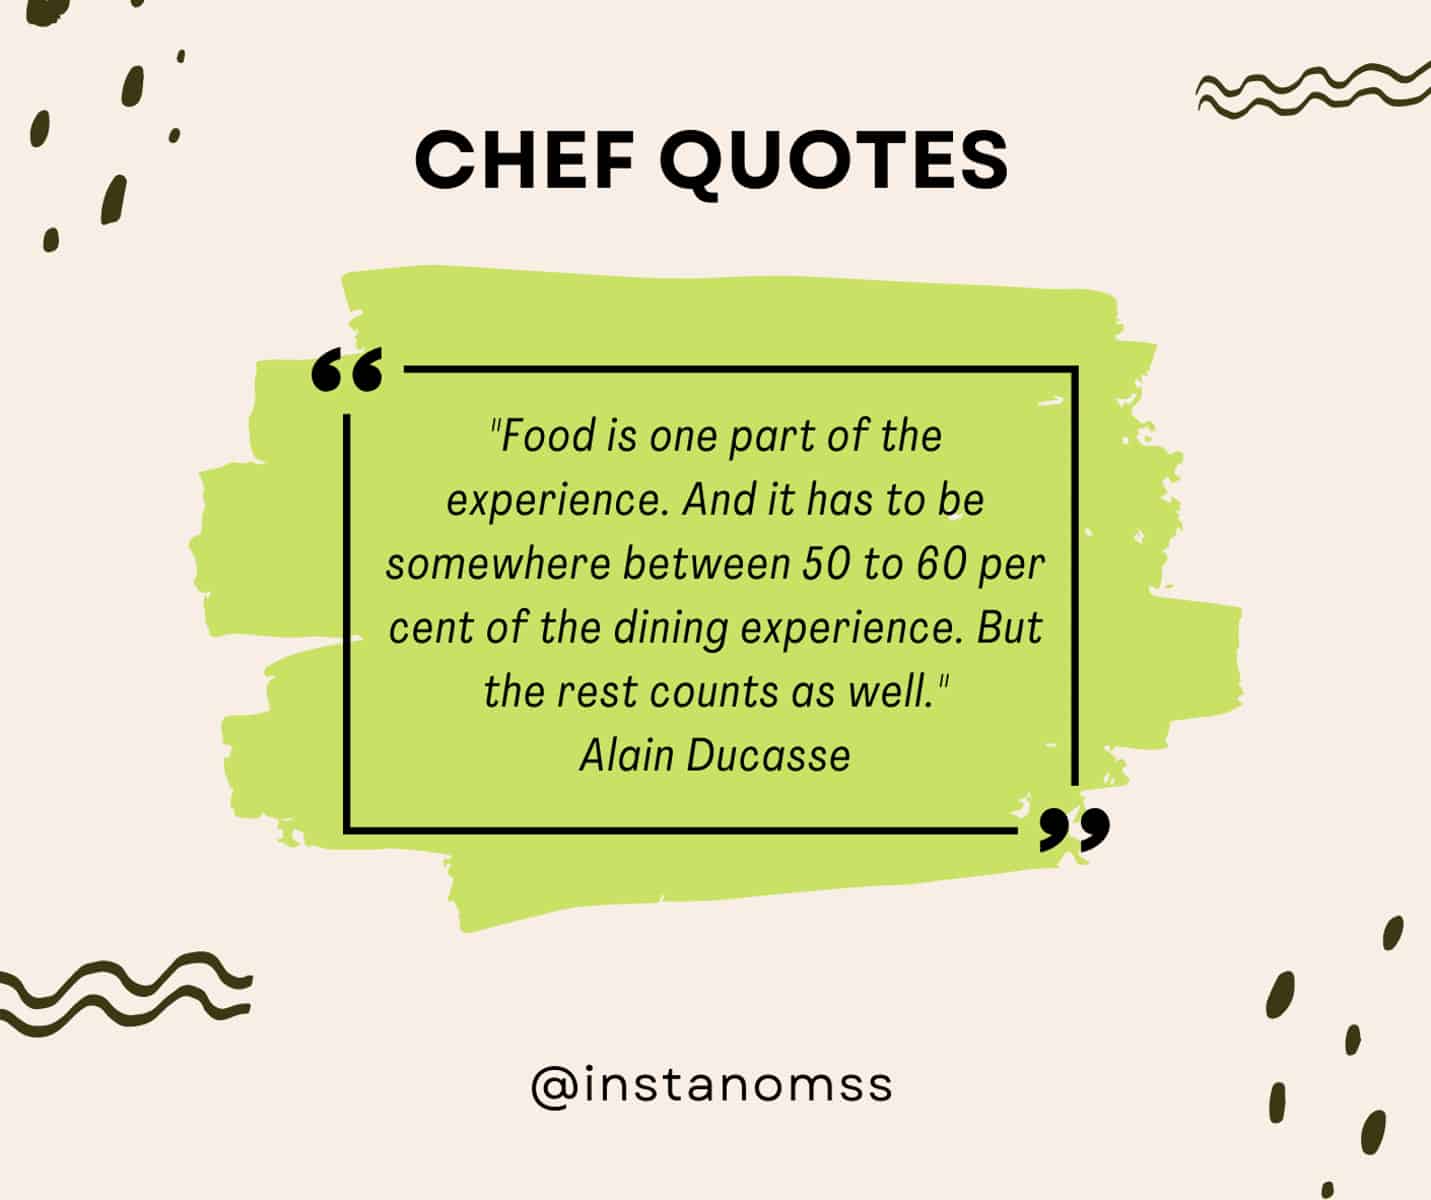 "Food is one part of the experience. And it has to be somewhere between 50 to 60 per cent of the dining experience. But the rest counts as well." Alain Ducasse